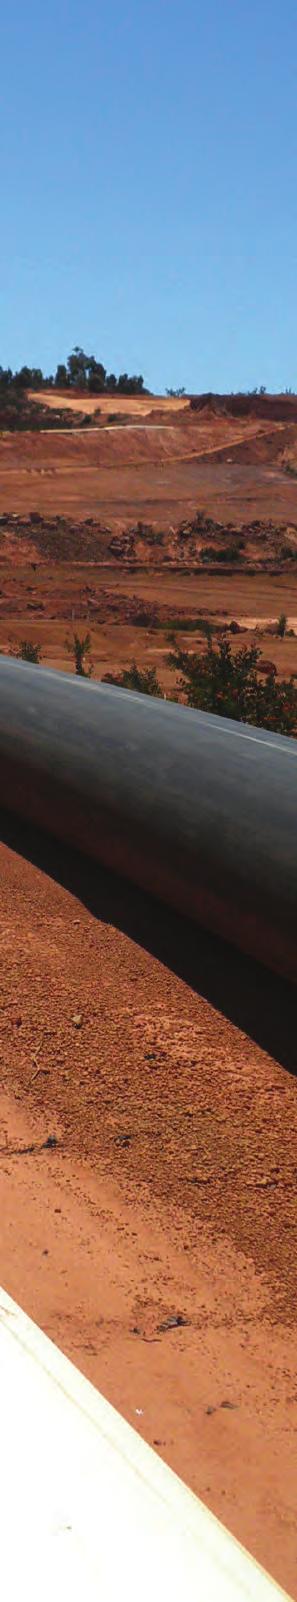 Company Introduction Acu-Tech Piping Systems is a manufacturer and supplier specialising in complete polyethylene (HD-PE) pipe systems and solutions for fluid / gas transfer and cable protection.